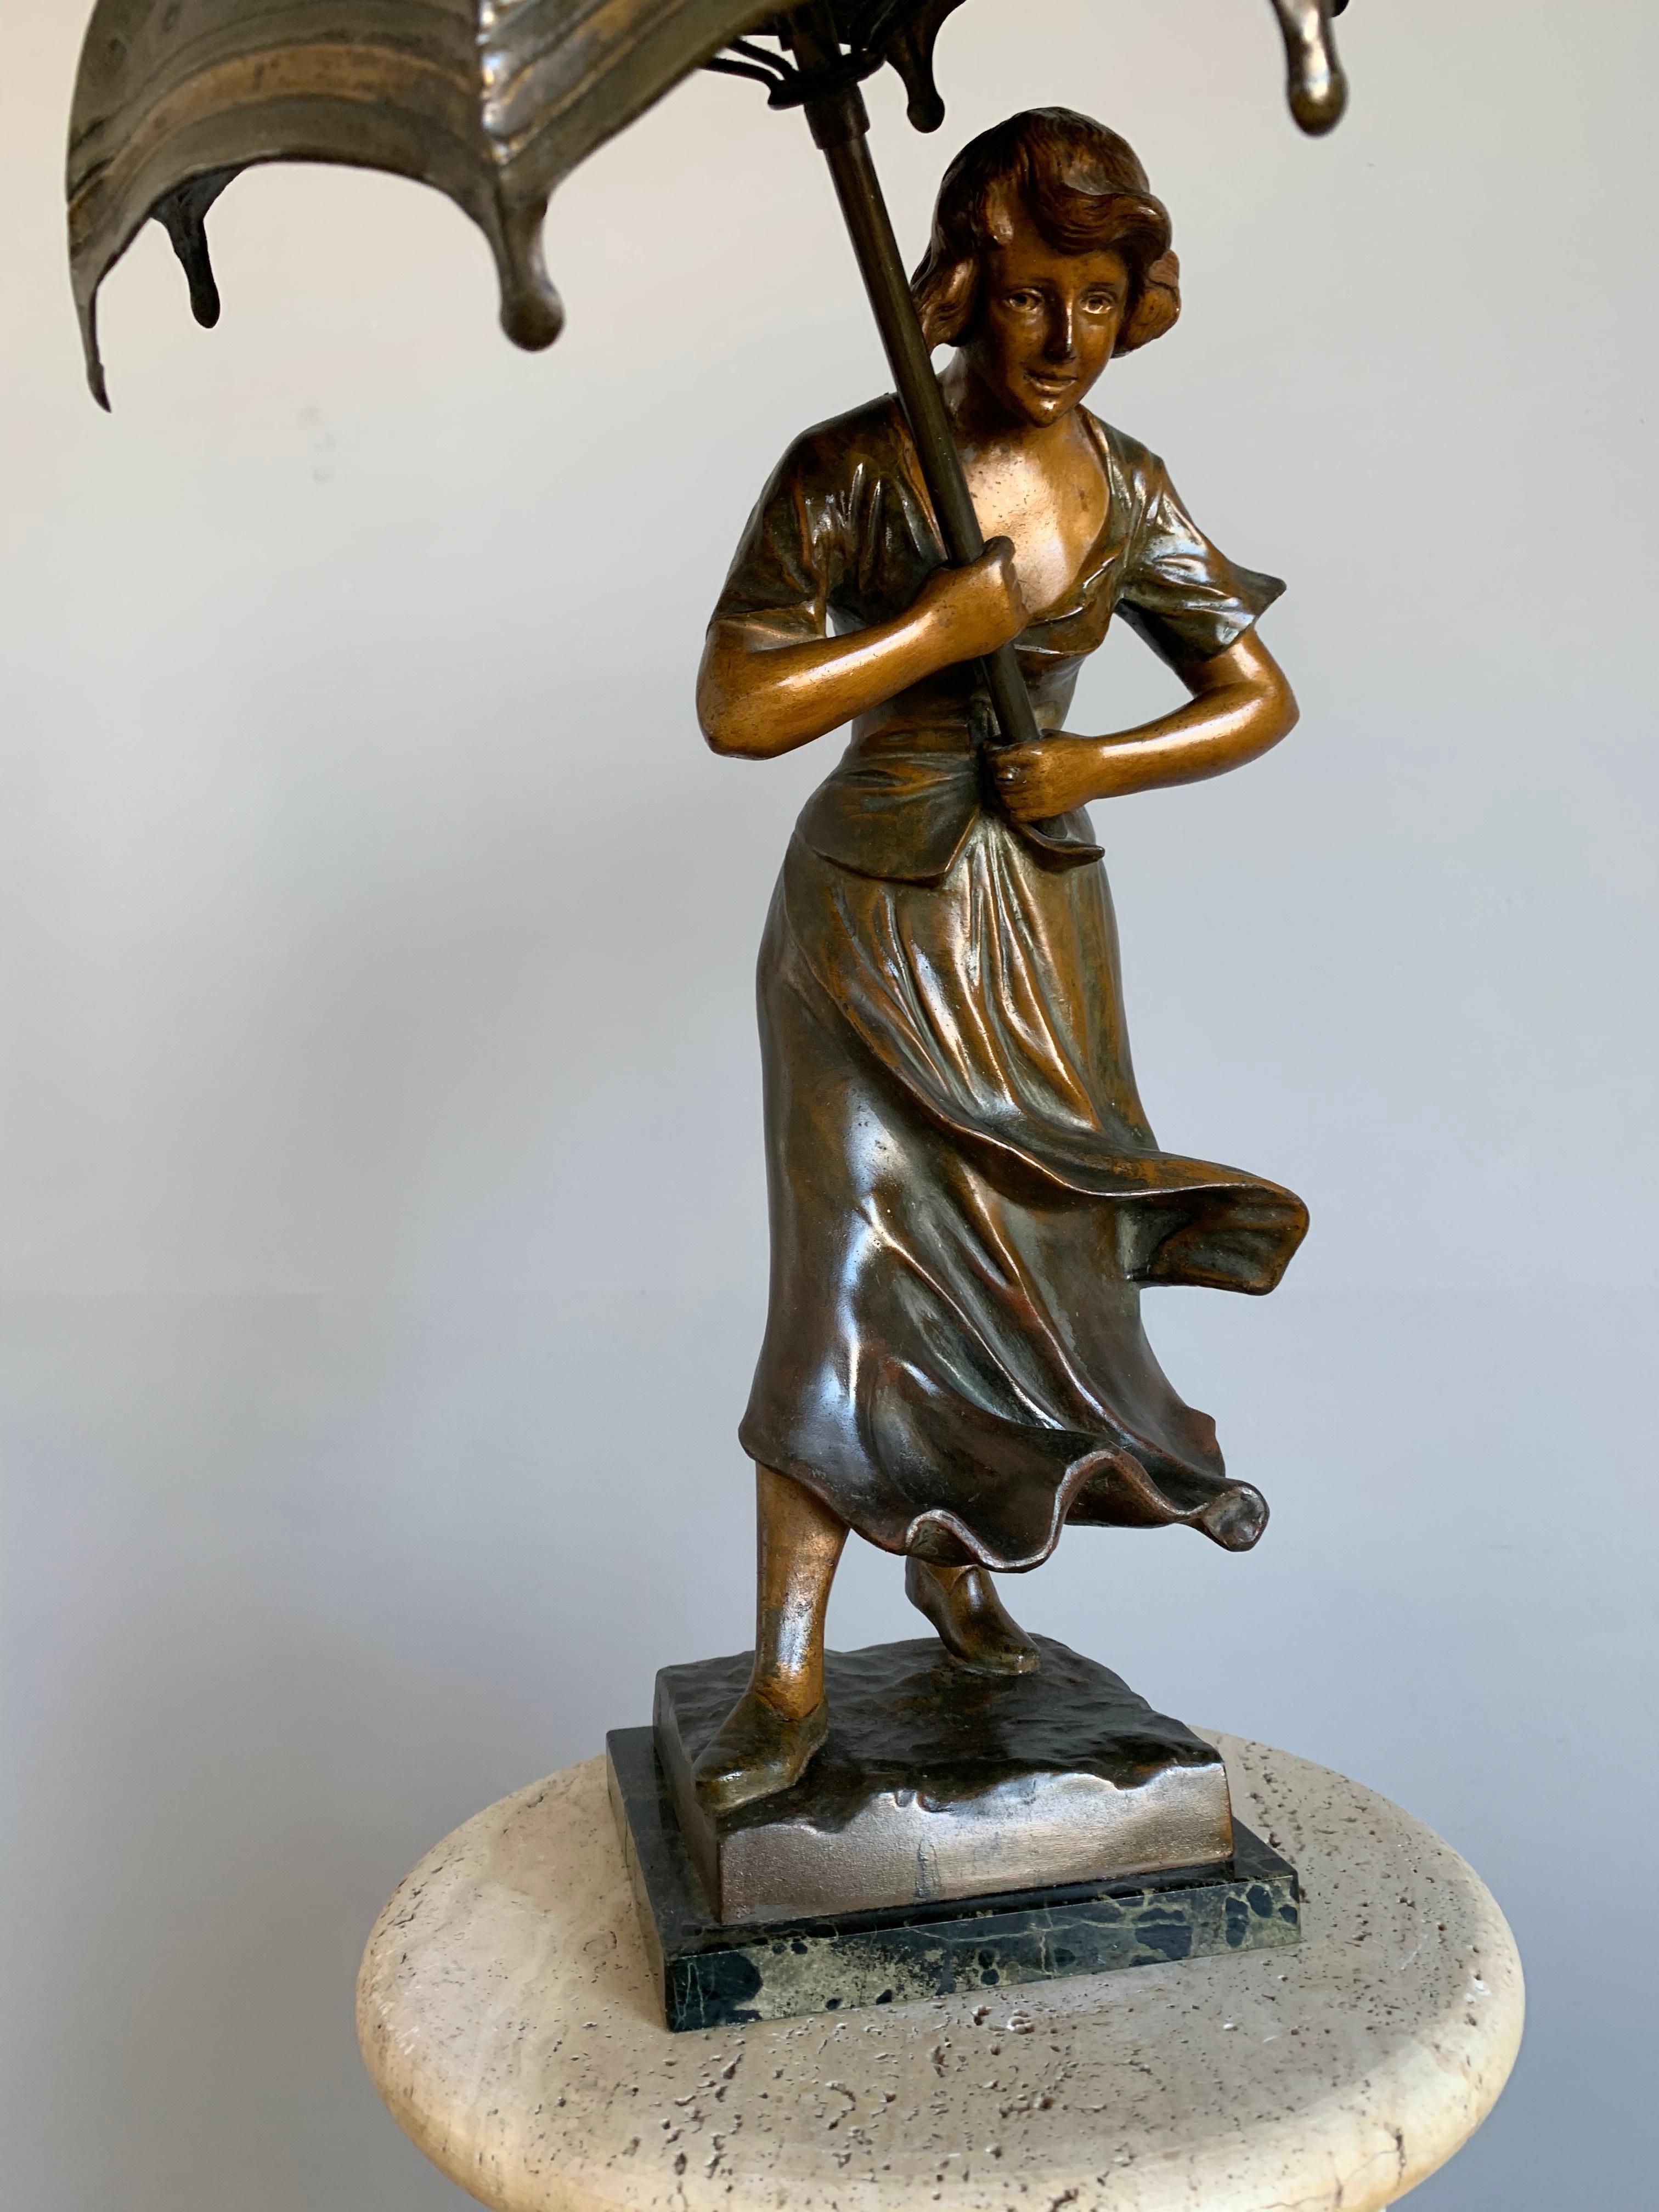 Stunning Art Deco Sculpture Desk or Table Lamp, Girl with Umbrella in the Wind 3